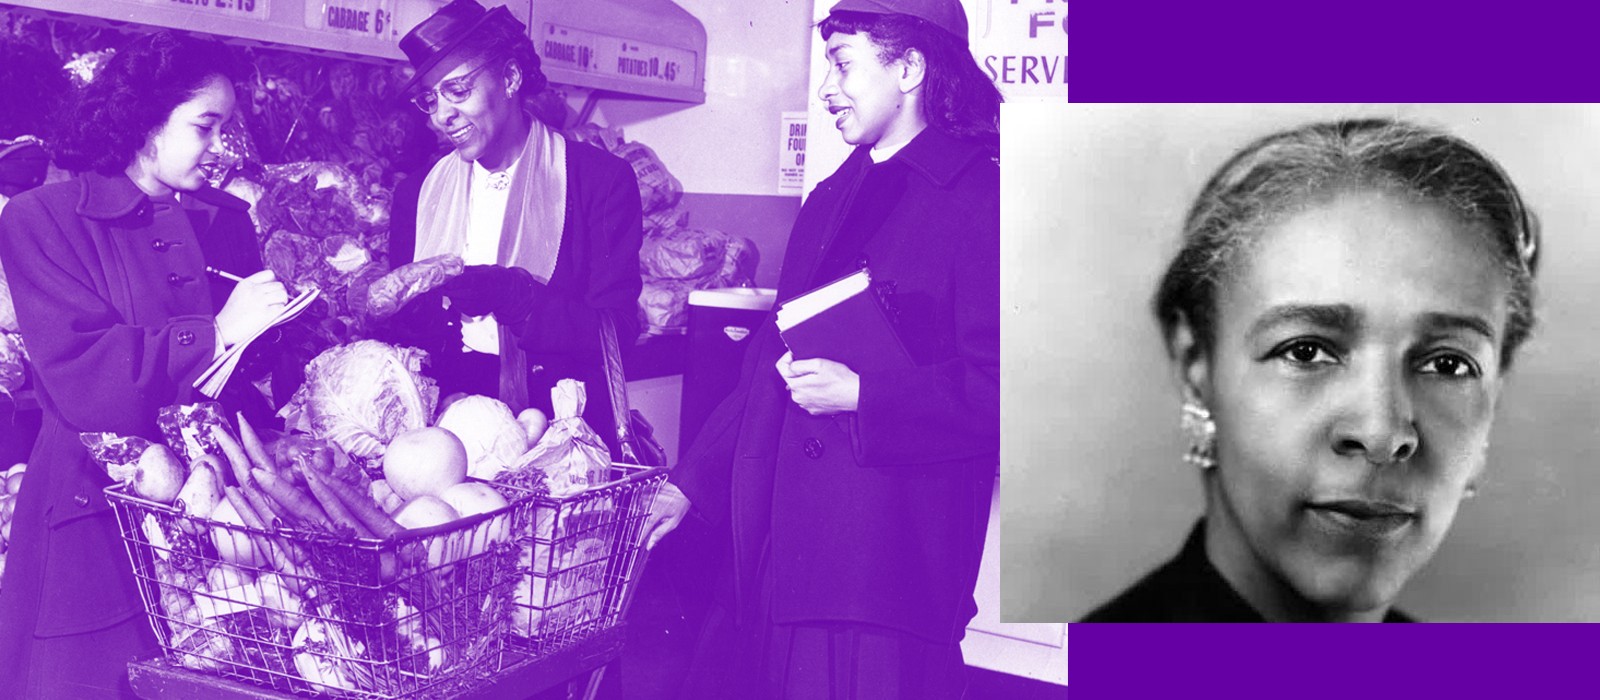 photo on left shows three women in black and white in a grocery store with a full cart; photo on right is a vintage portrait of a woman